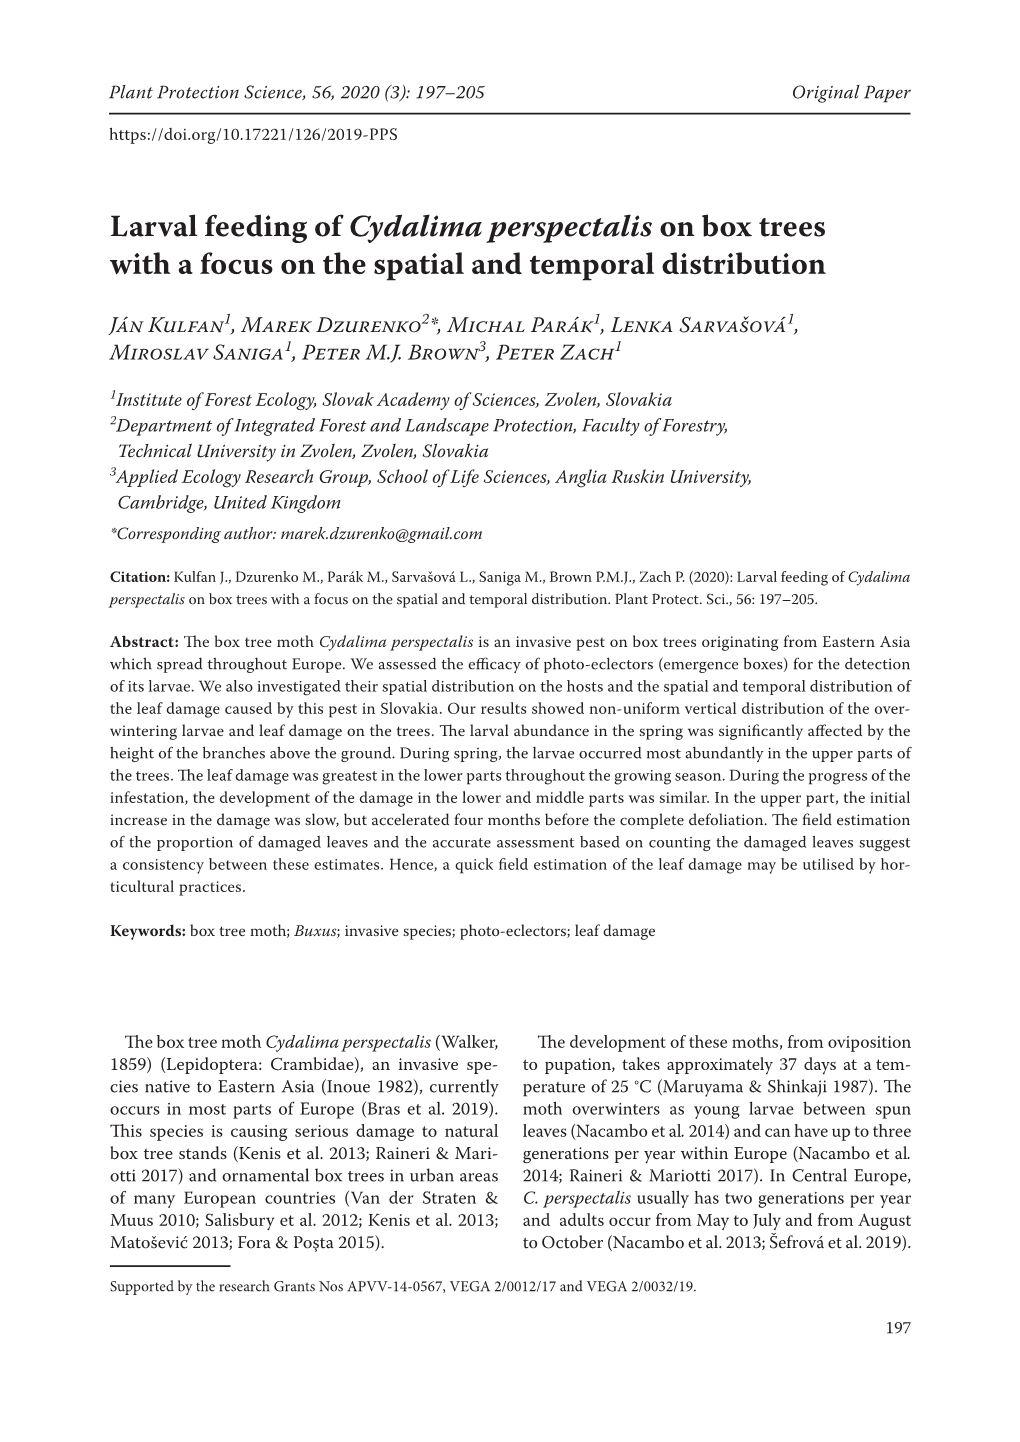 Larval Feeding of Cydalima Perspectalis on Box Trees with a Focus on the Spatial and Temporal Distribution